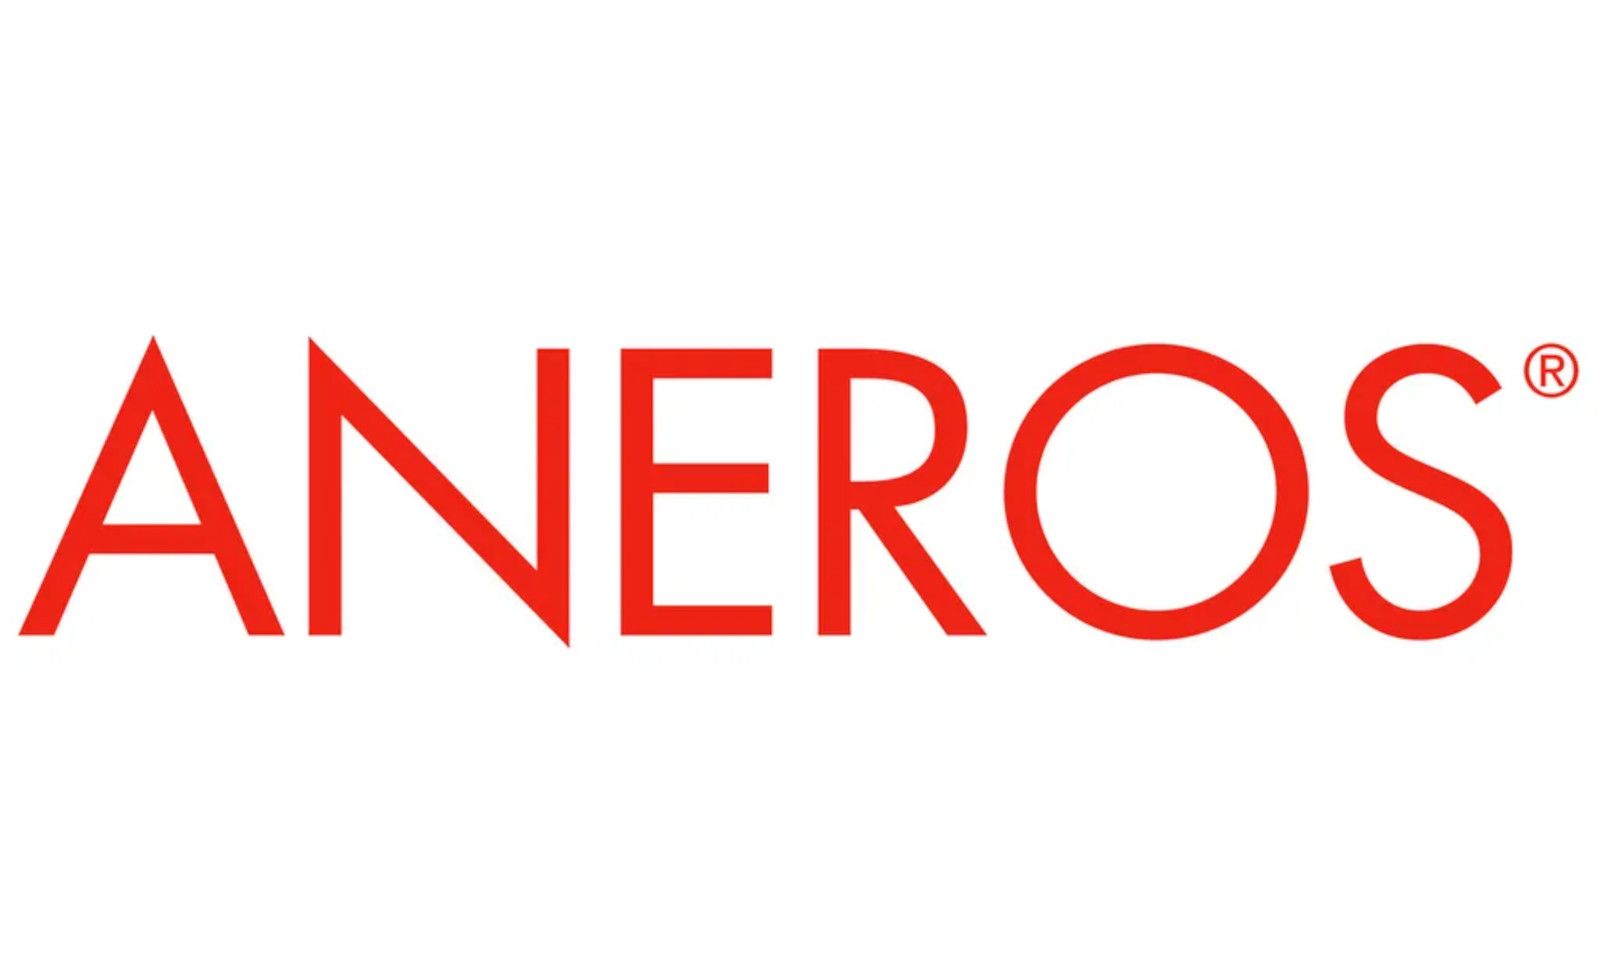 Aneros Wins Outstanding Anal Product at 2022 AVN 'O' Awards